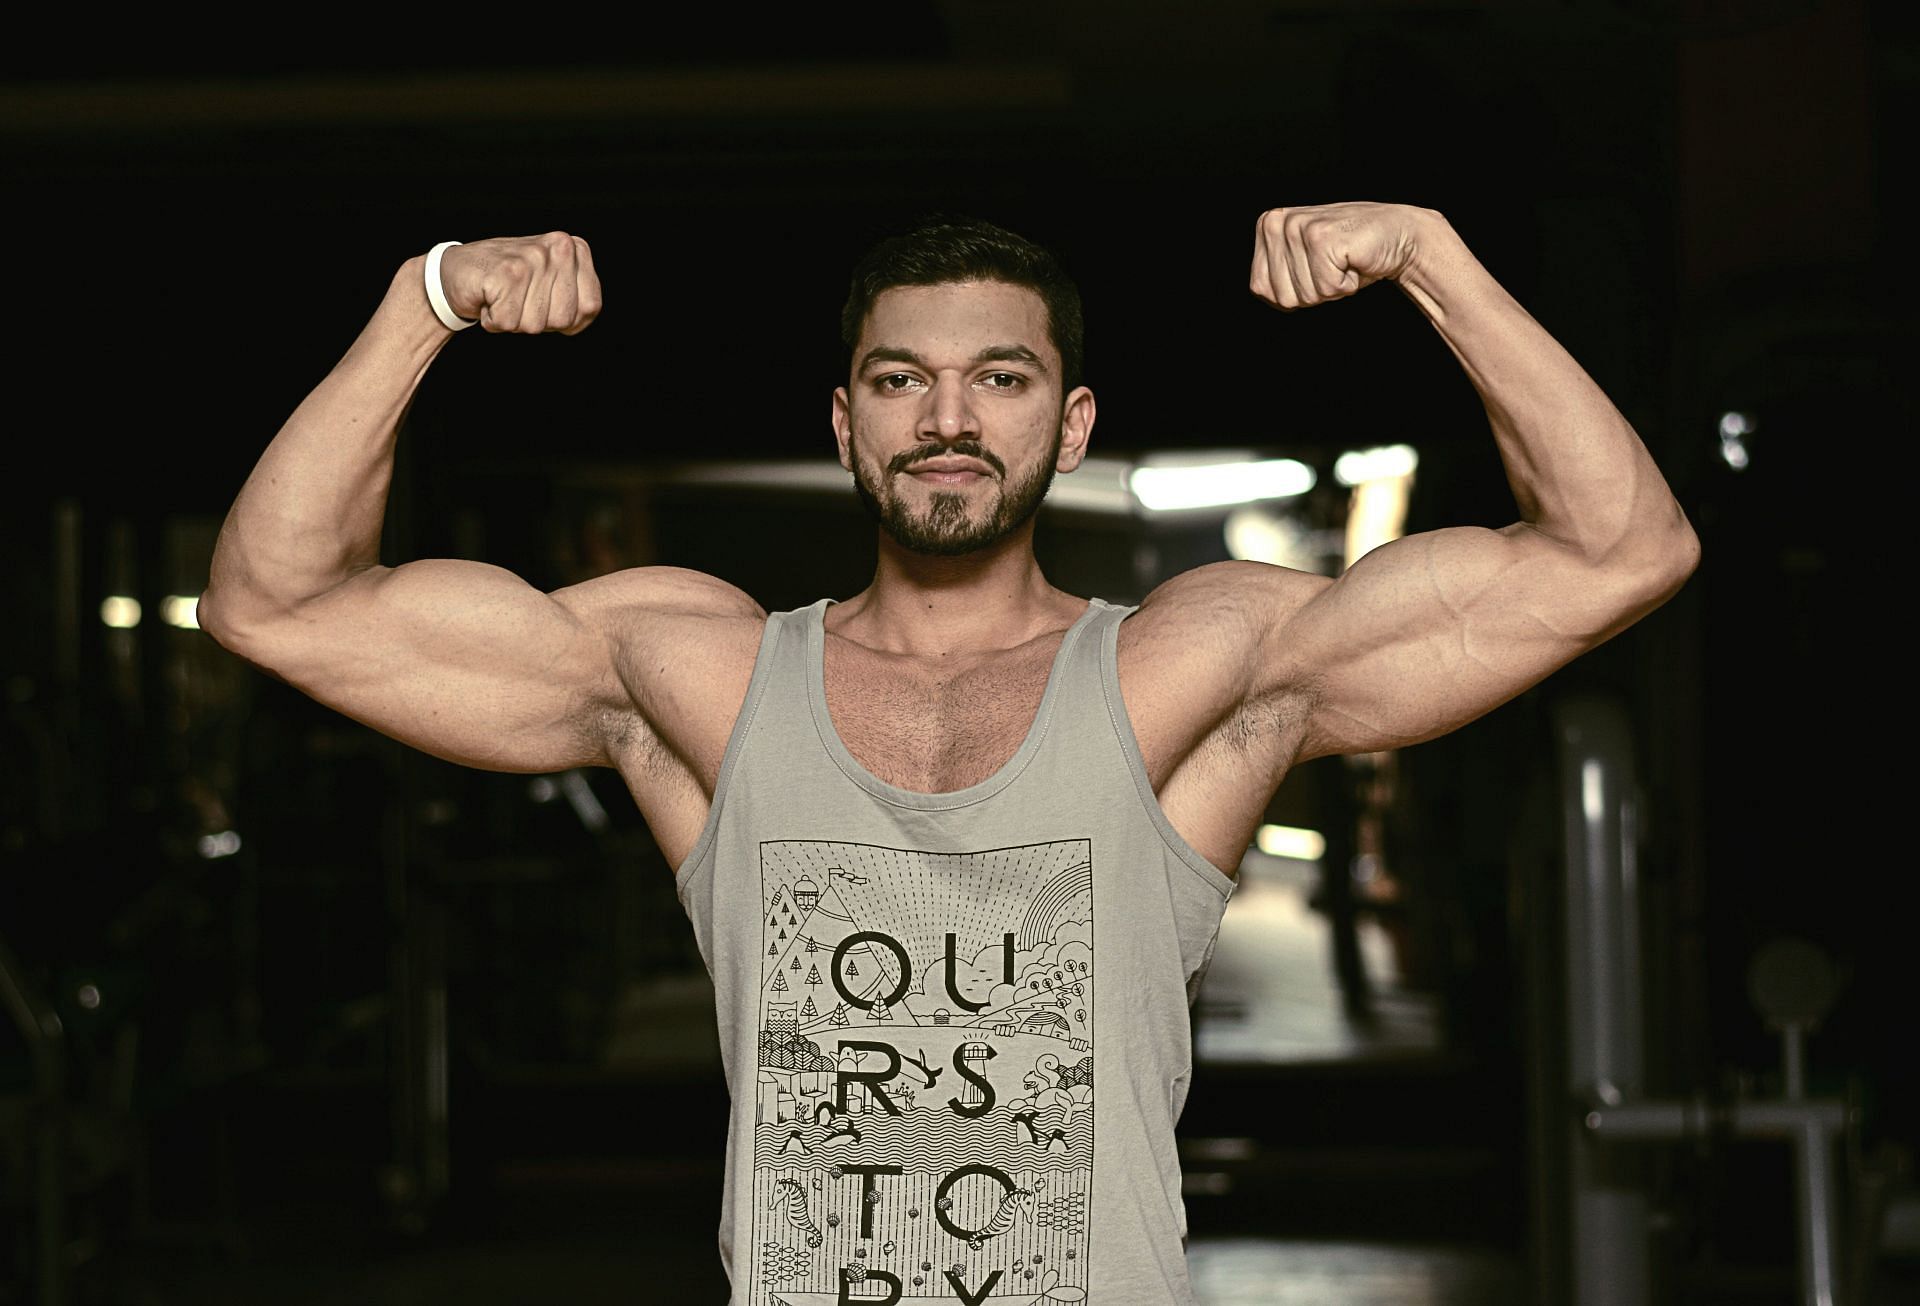 Best and effective exercises that beginners can do to build muscles. (Image via Pexels/Mahmood Sufiyan)